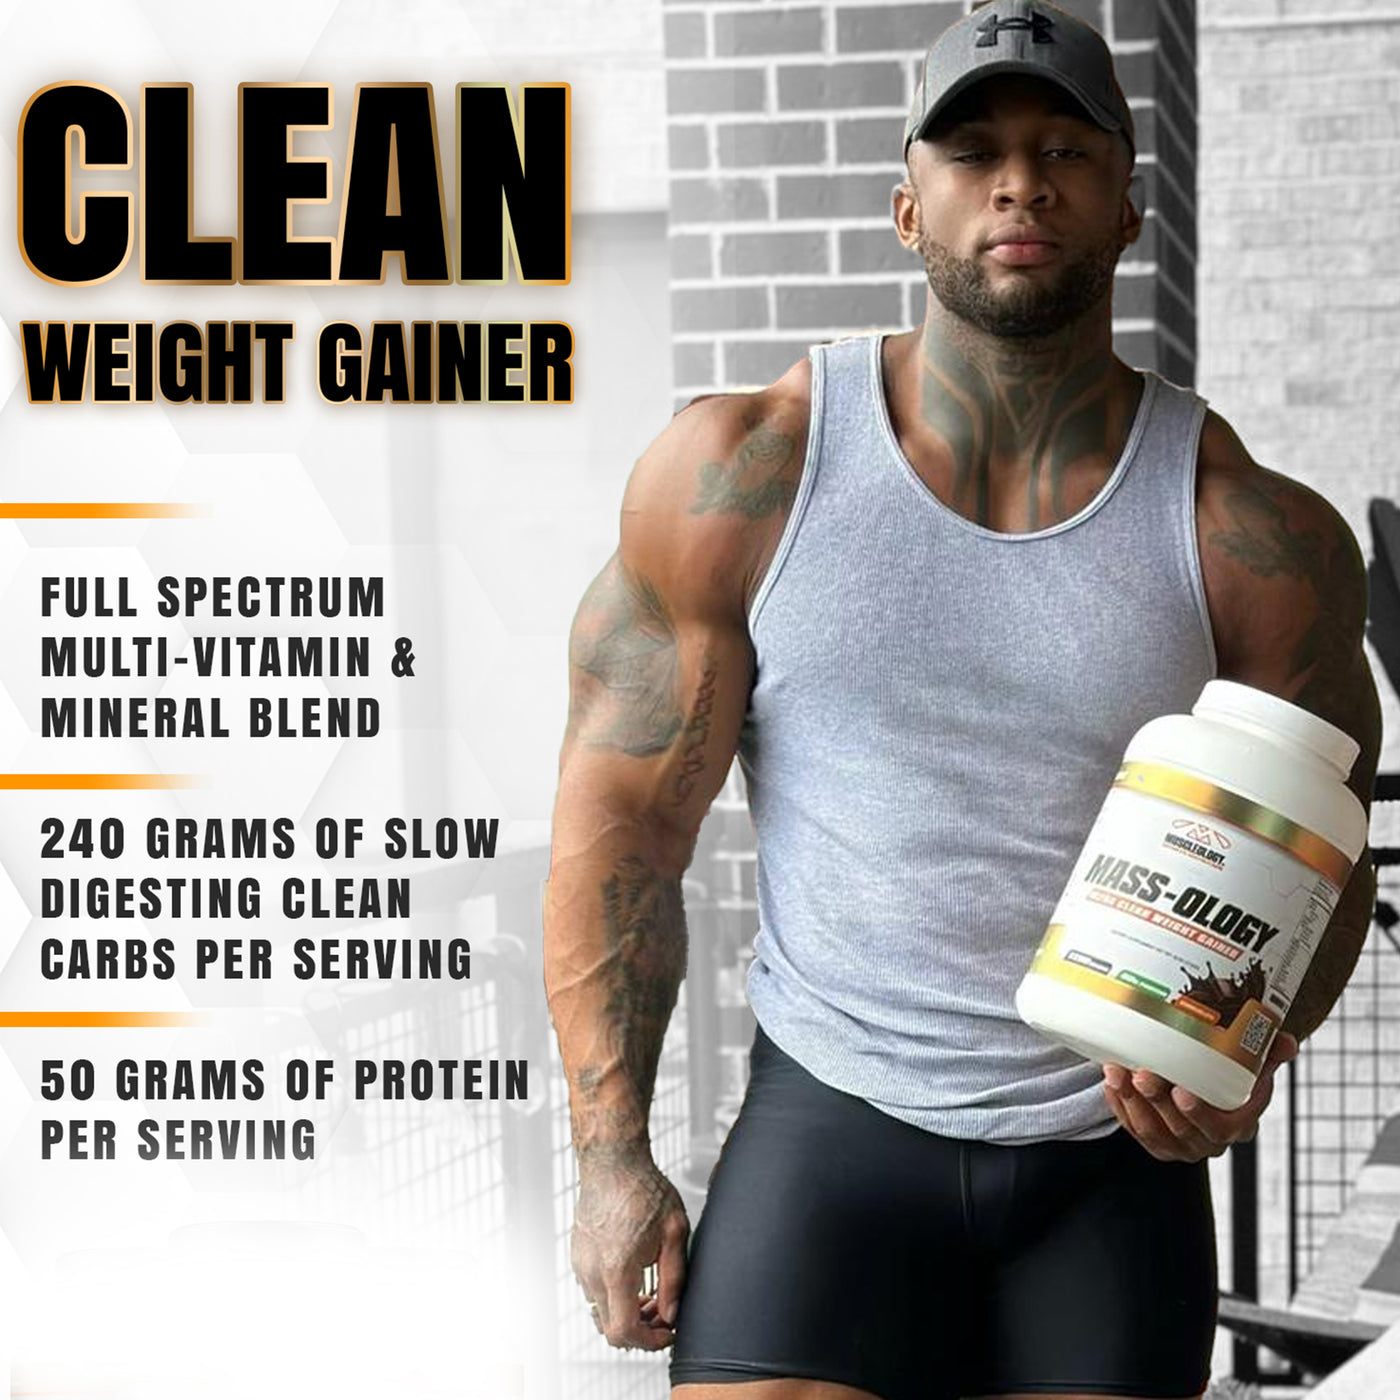 Mass-ology™ - Clean Weight Gainer